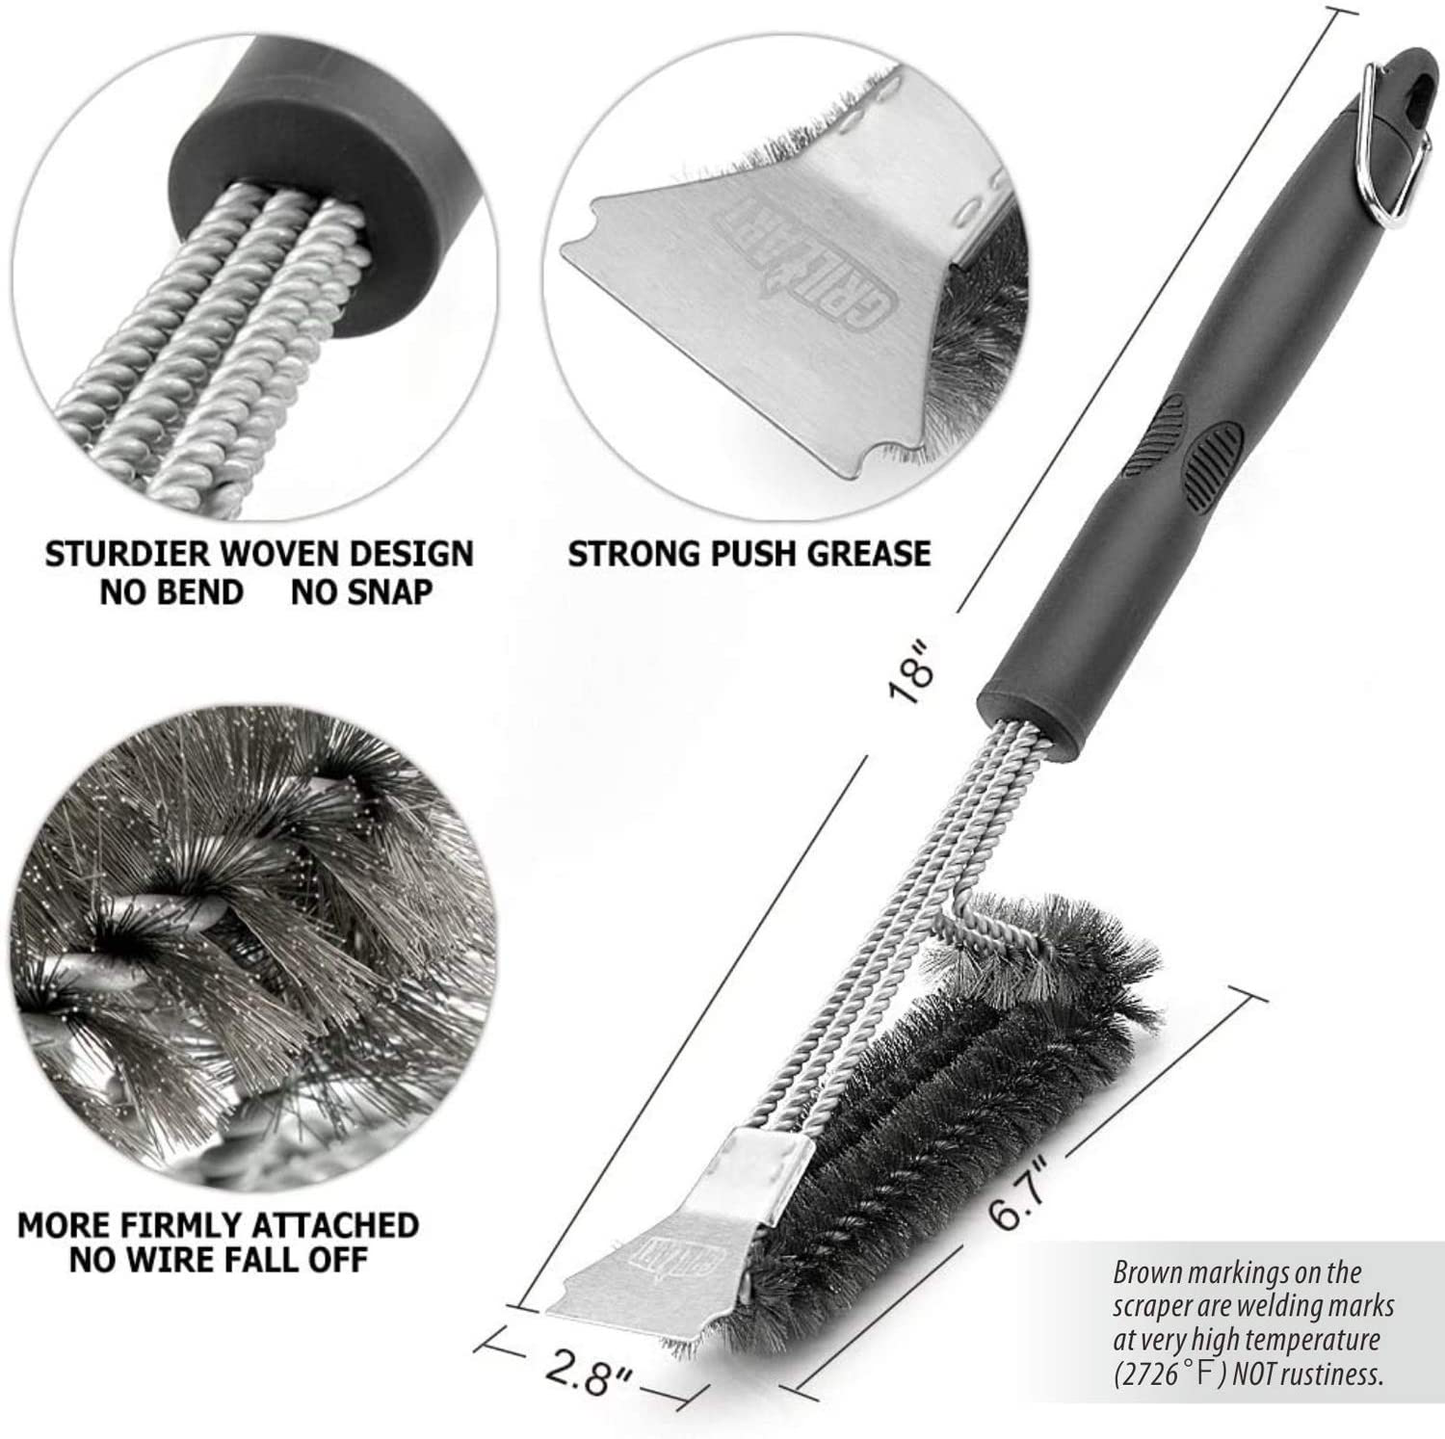 Grill Brush and Scraper - Extra Strong BBQ Cleaner Accessories - Safe Wire Bristles 18" Stainless Steel Barbecue Triple Scrubber Cleaning Brush for Gas/Charcoal Grilling Grates, Wizard Tool